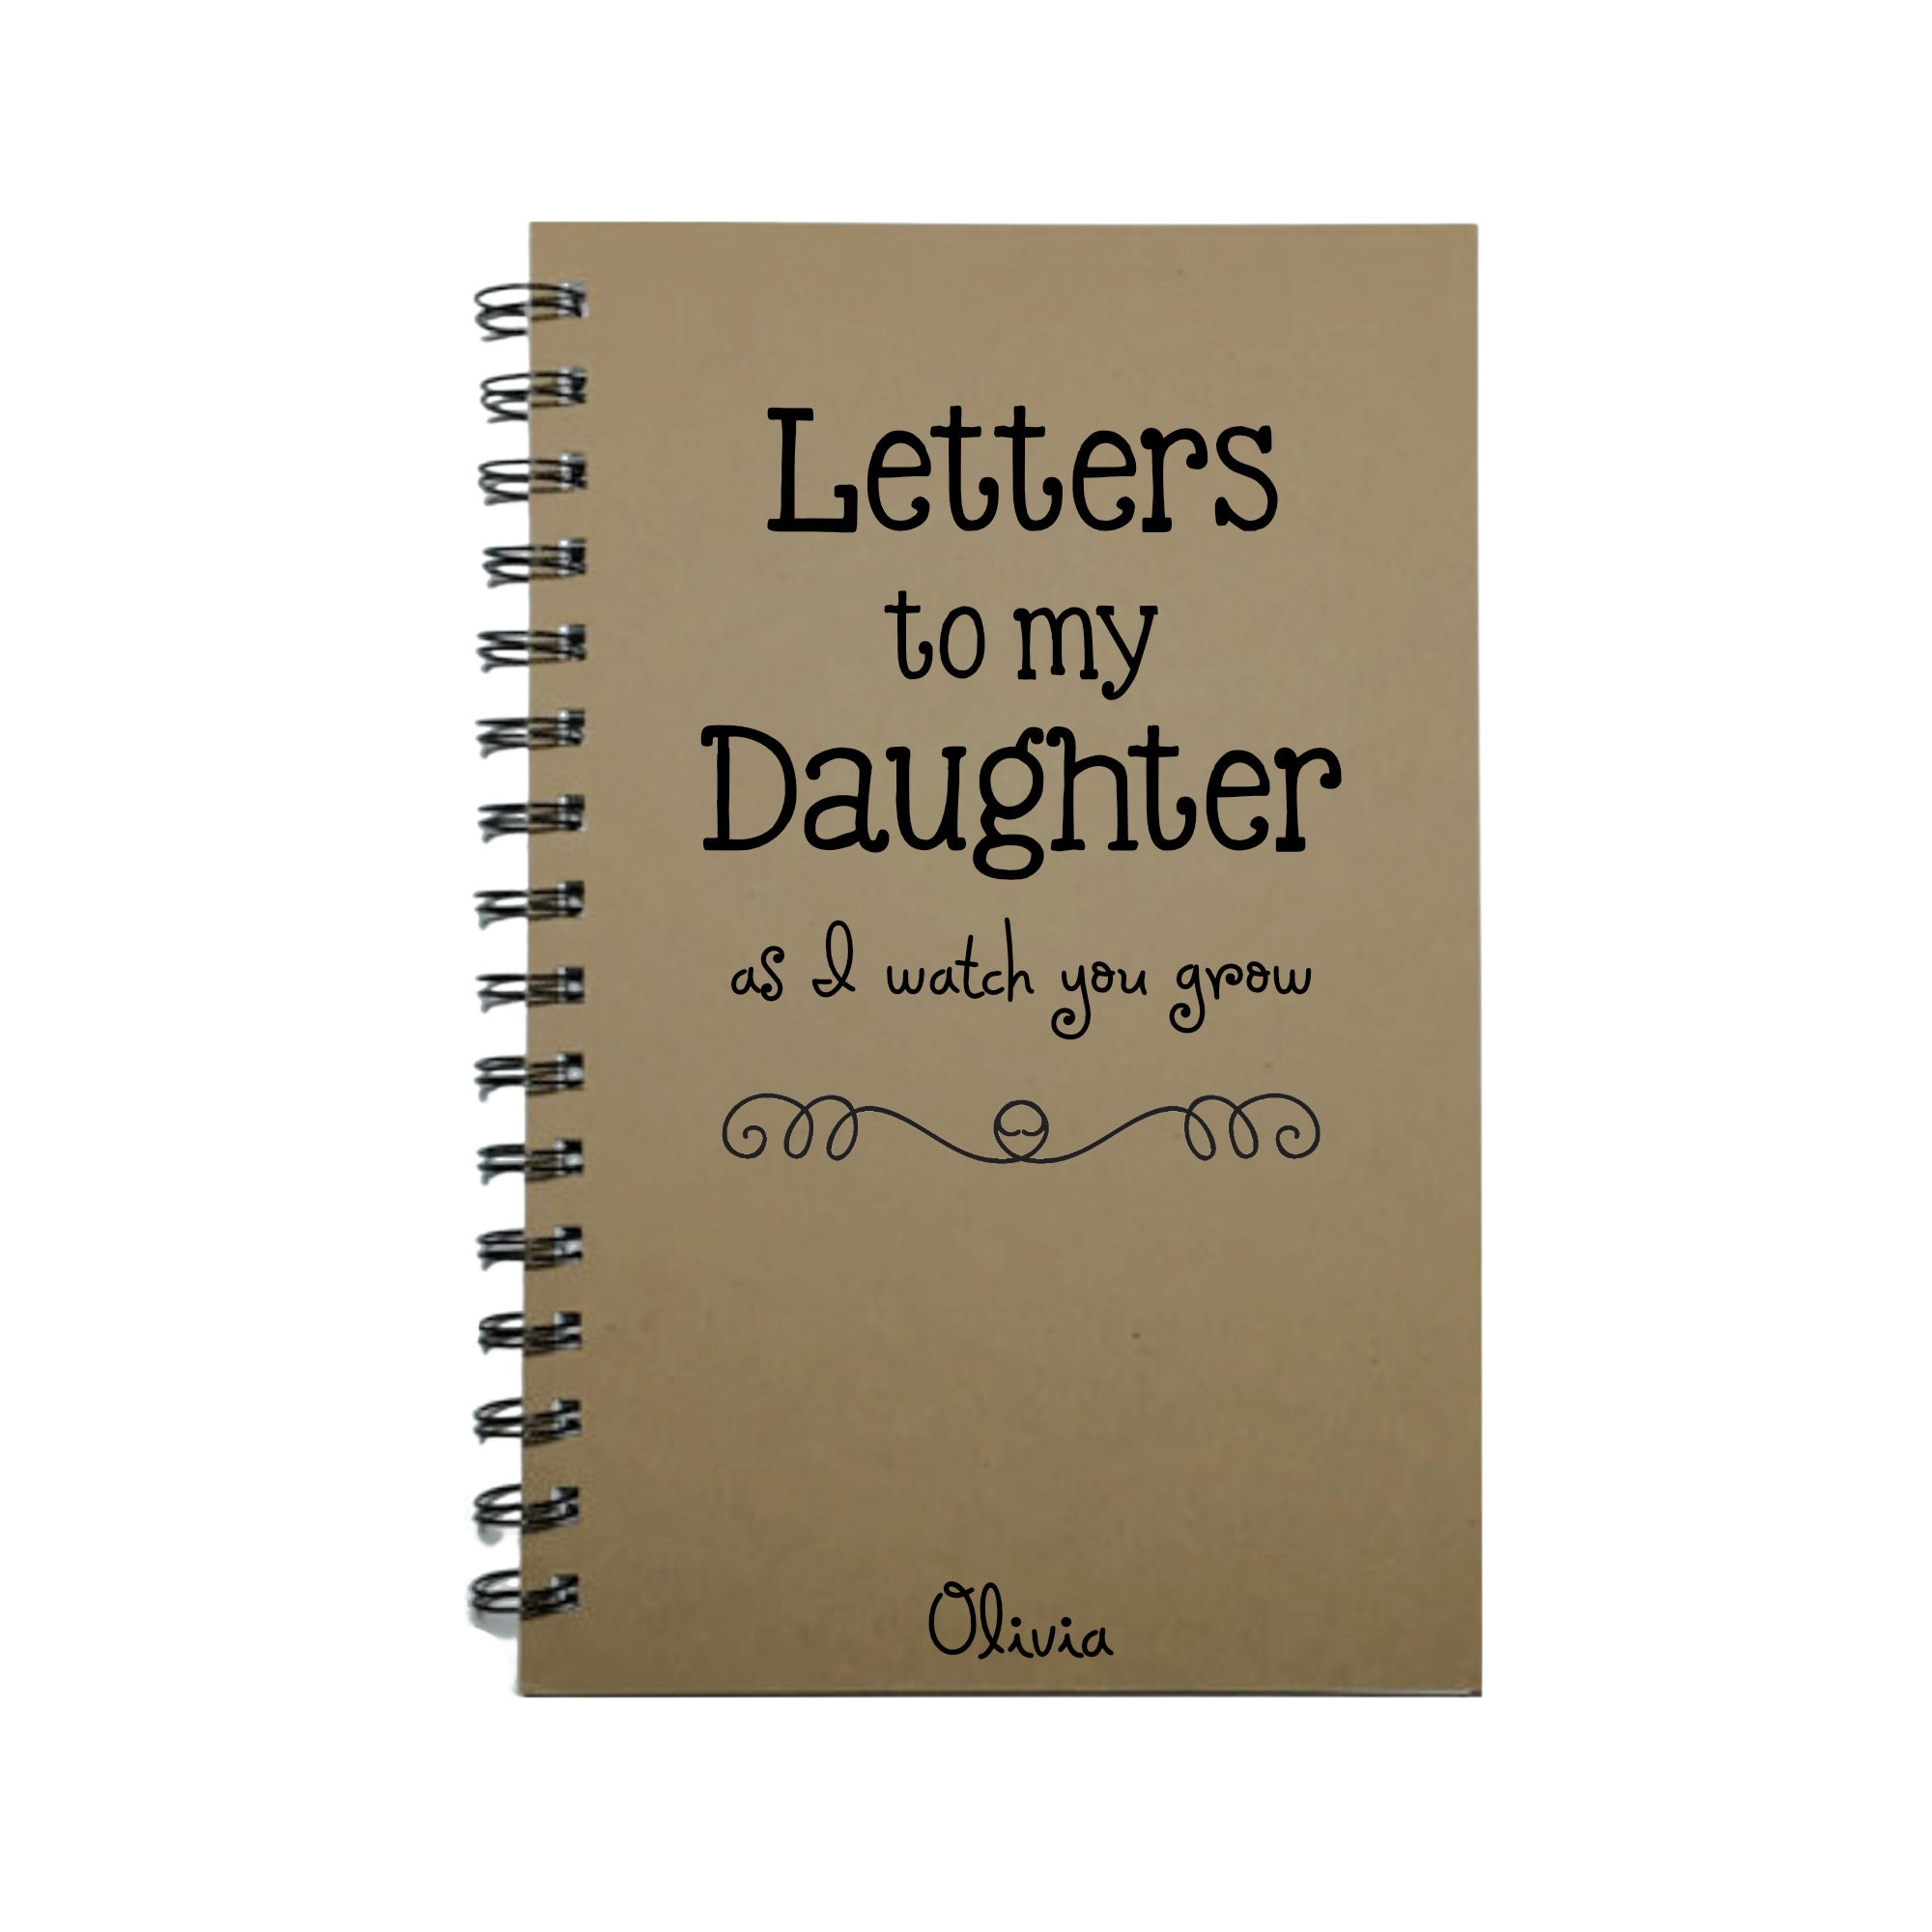 Letters to my Daughter, Baby Keepsake Gift, To My Daughter, Journal, Notebook, Tradition, Gift from Mother, As you grow, Diary, Baby Girl